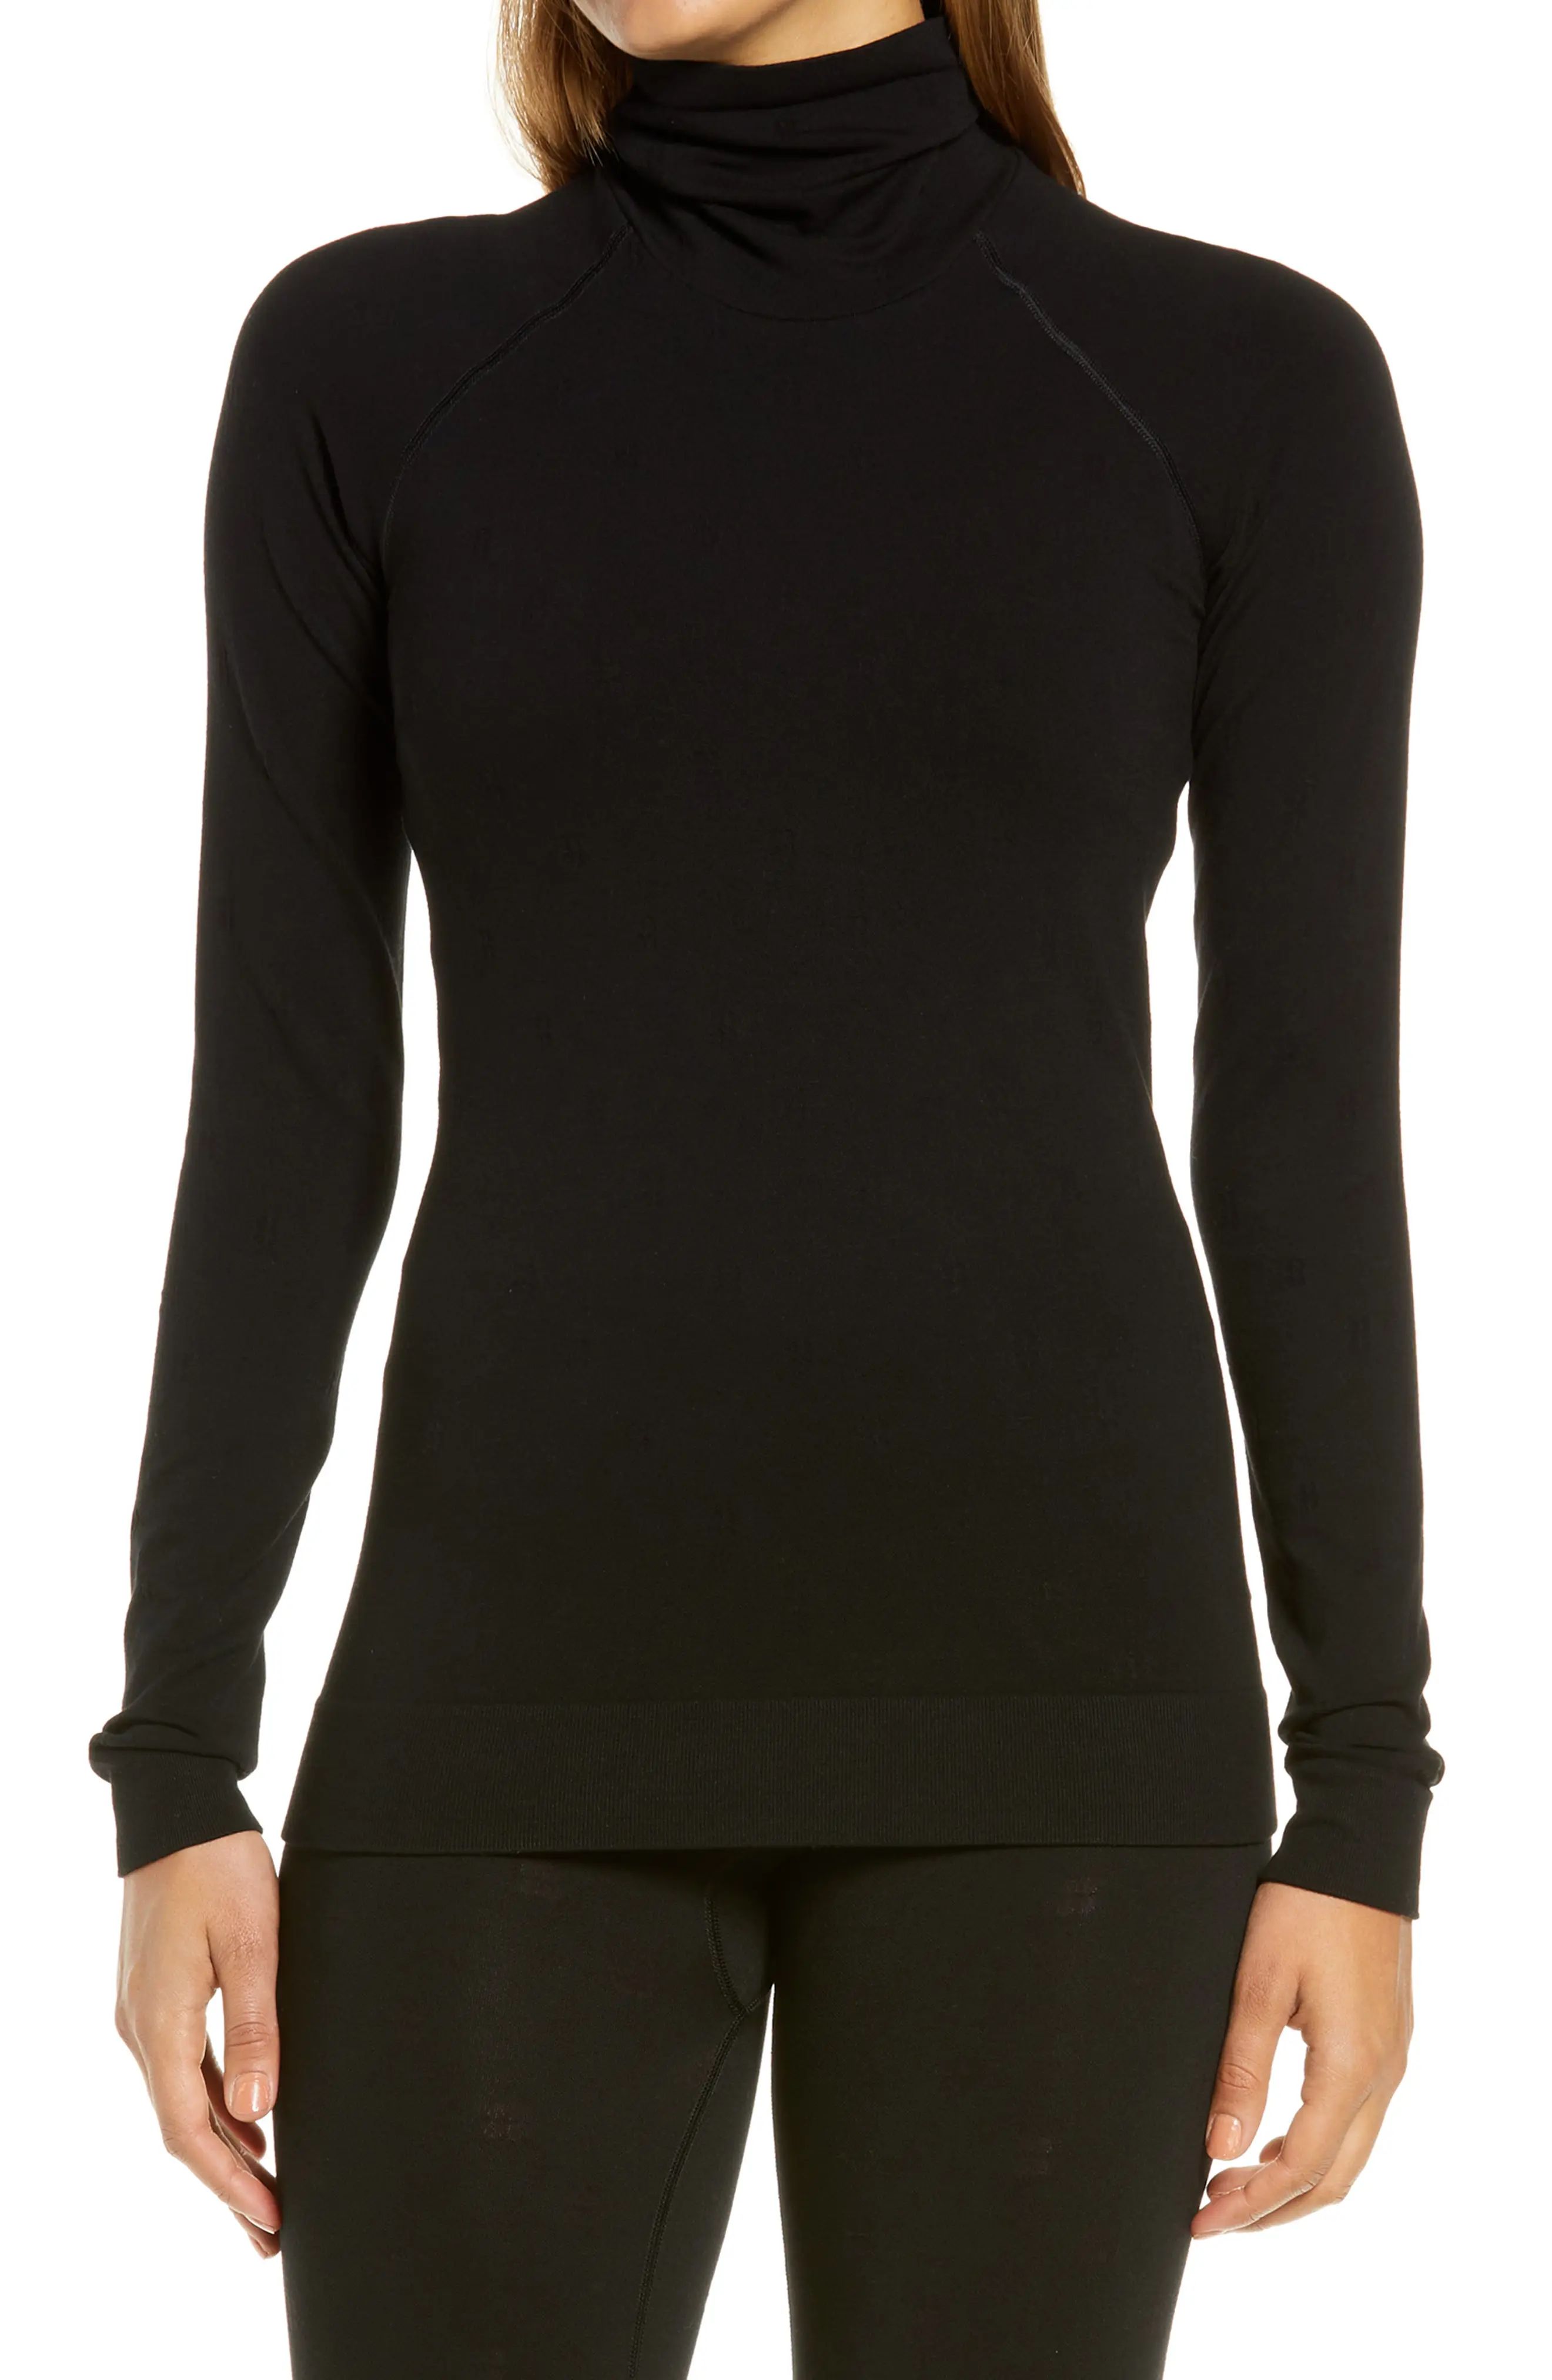 Sweaty Betty Jacquard Base Layer Turtleneck Pullover in Black at Nordstrom, Size Large | Nordstrom